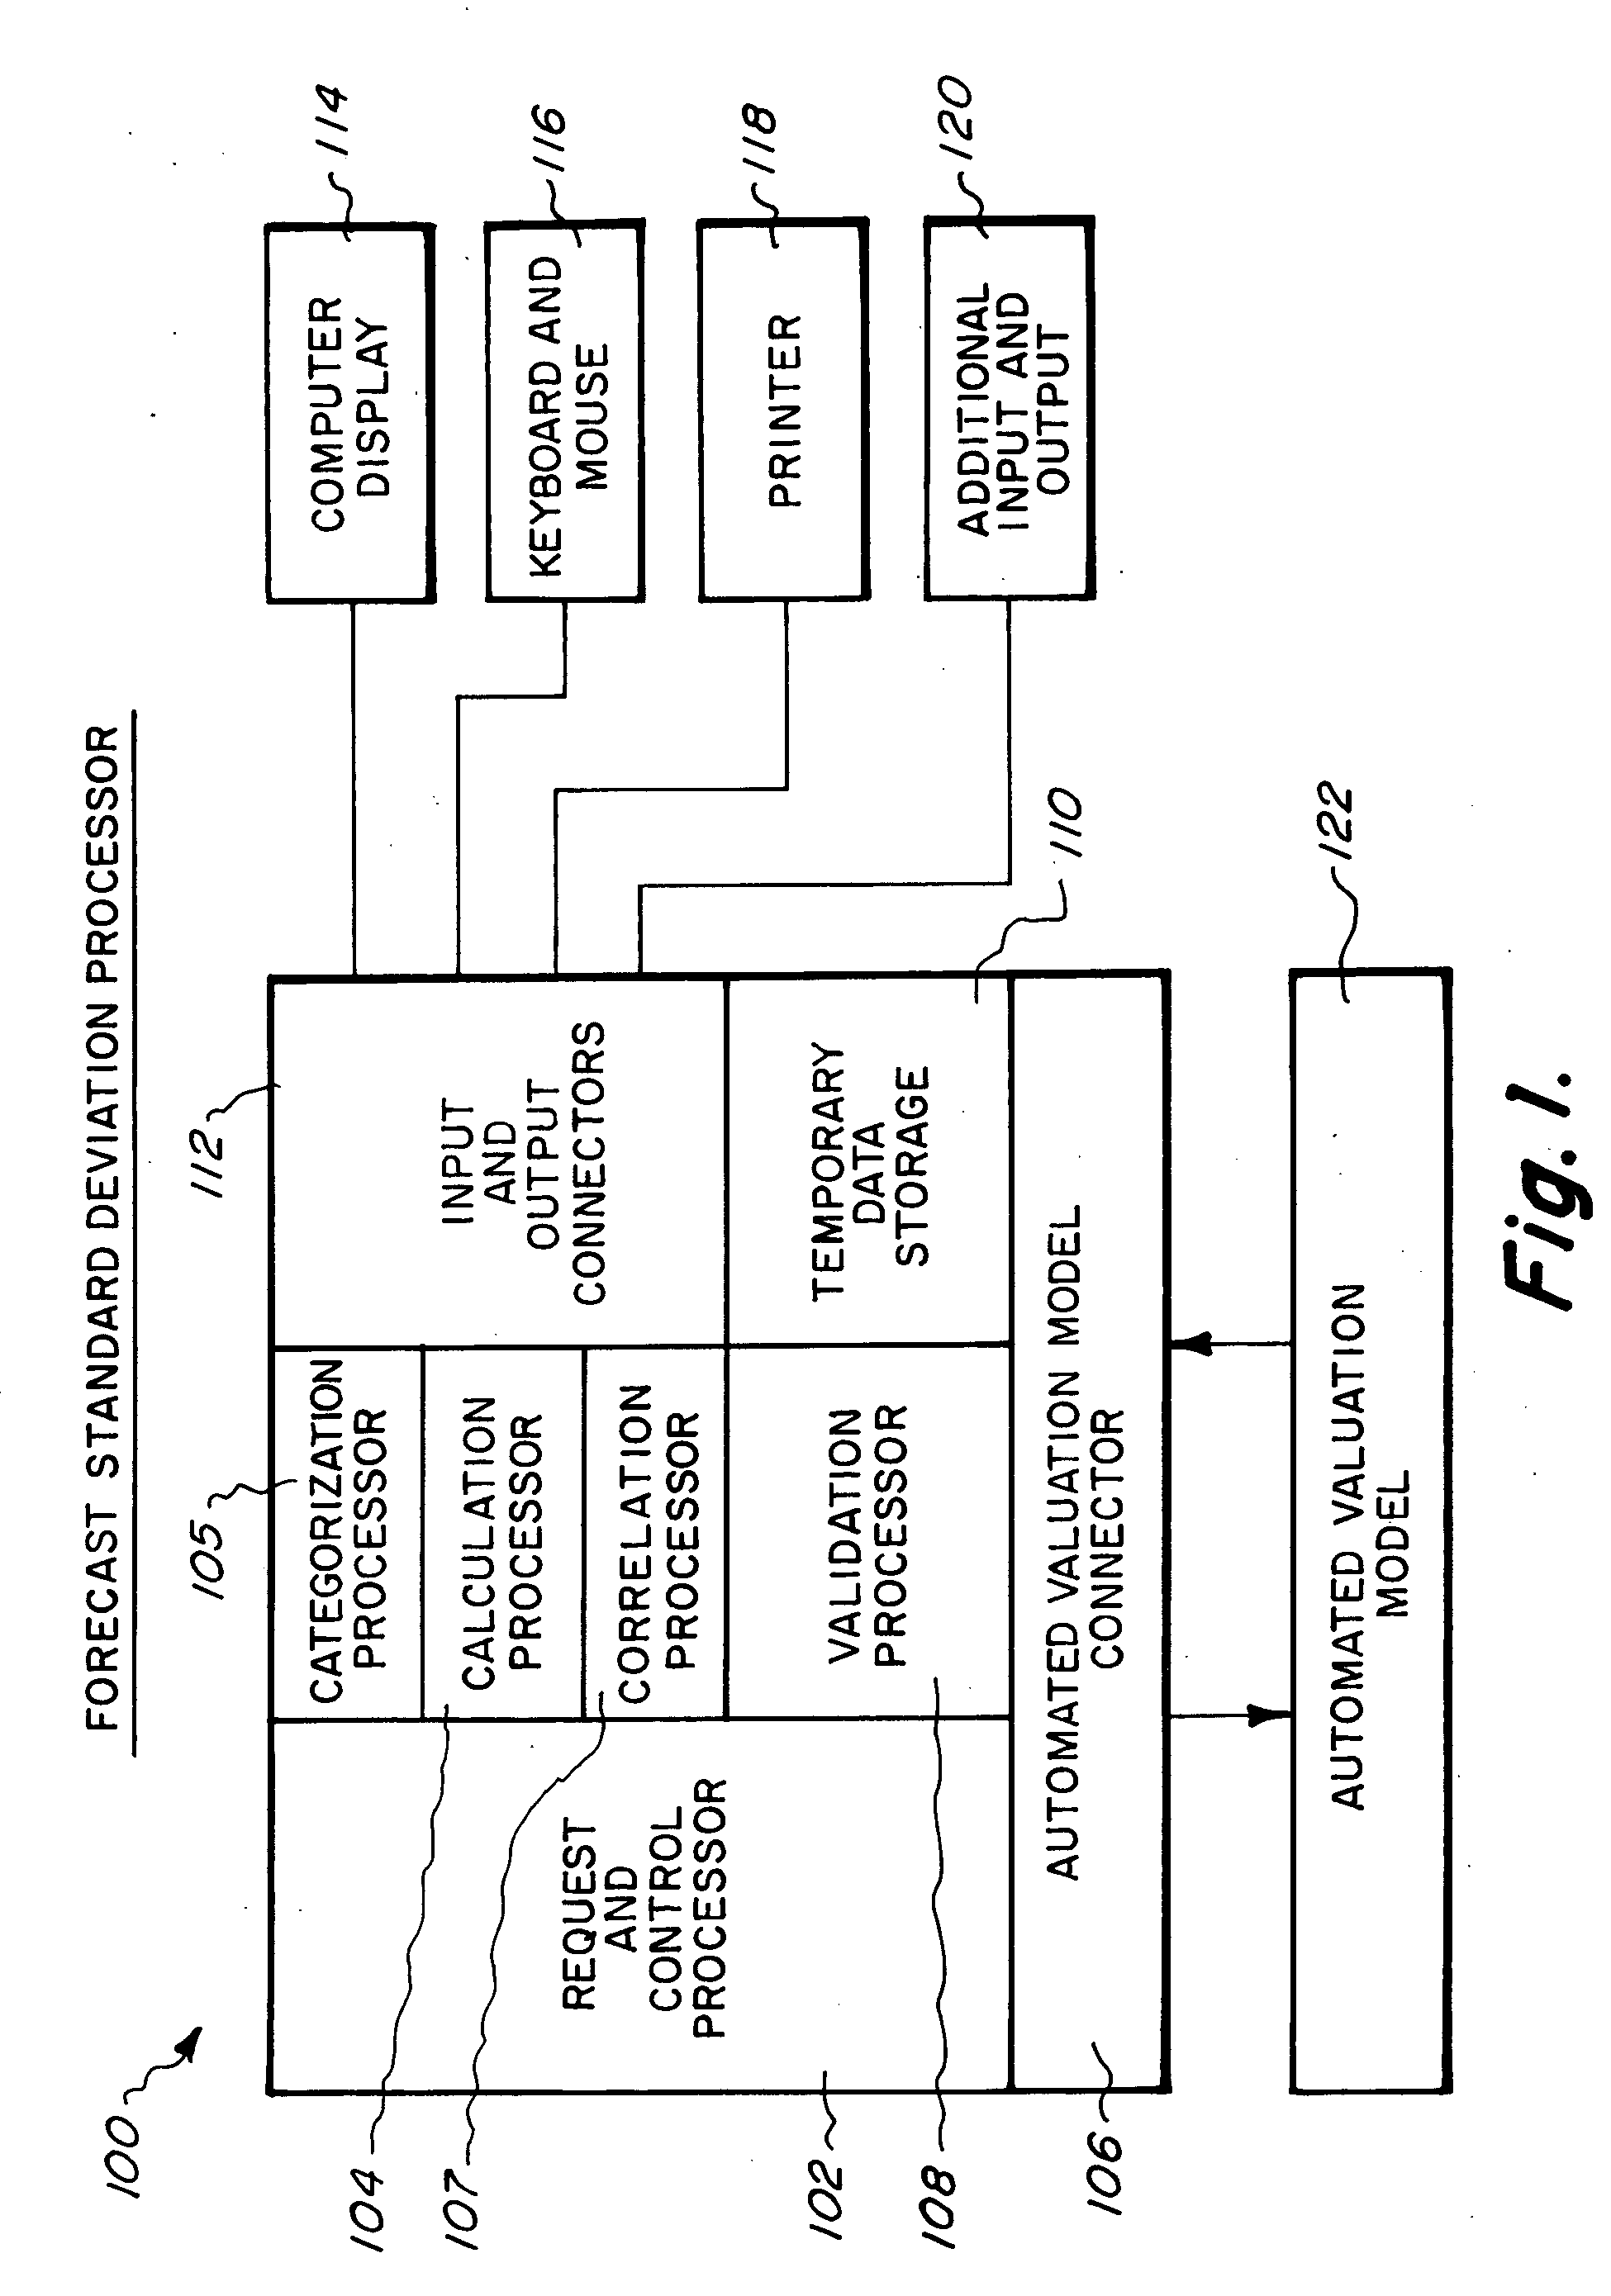 Method and apparatus for constructing a forecast standard deviation for automated valuation modeling